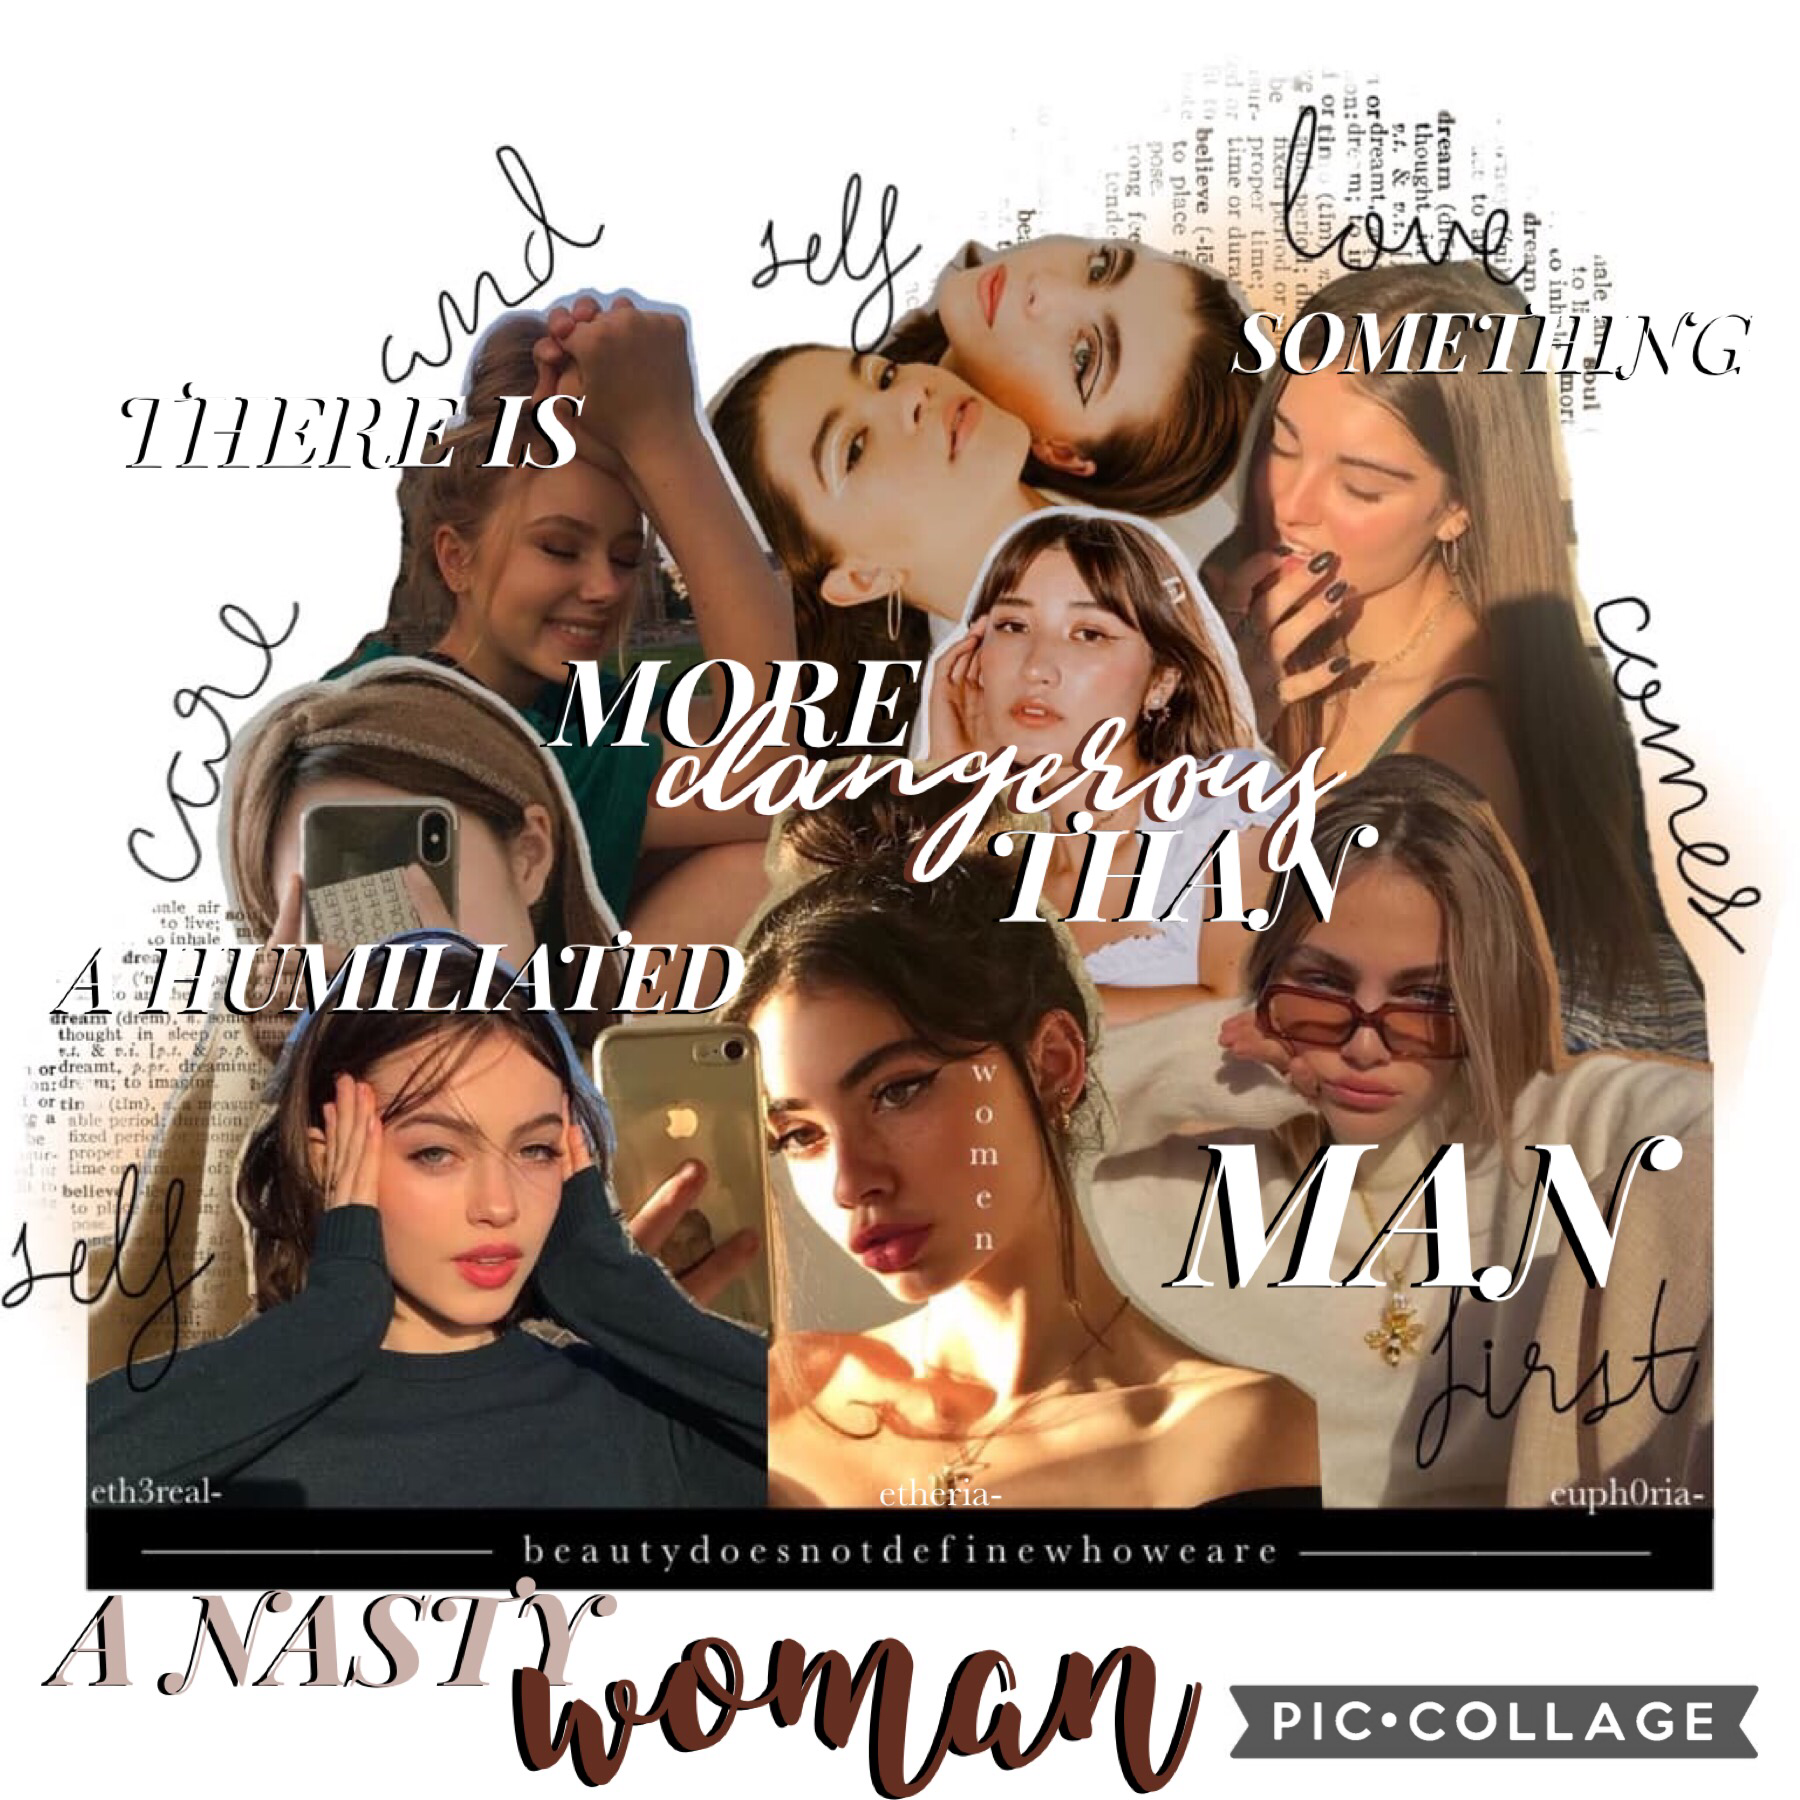 📀Tap📀
Here’s our collage for international women’s day! Hope you all like it! ~Caite and Lyly